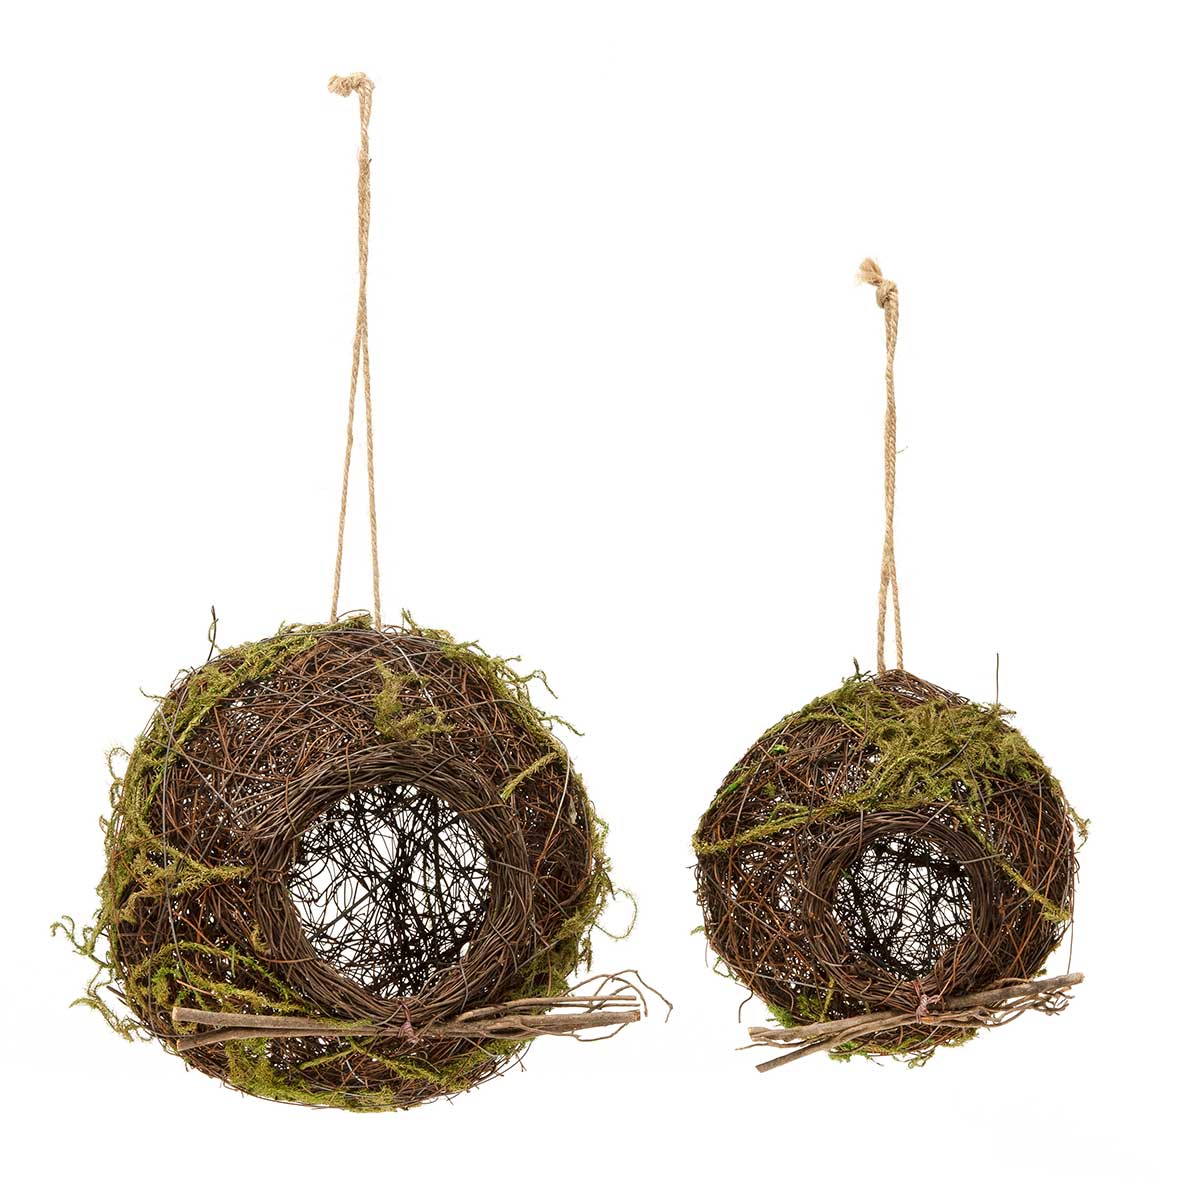 TWIG NEST BALL LARGE 7.5IN X 7IN BROWN/GREEN - Click Image to Close